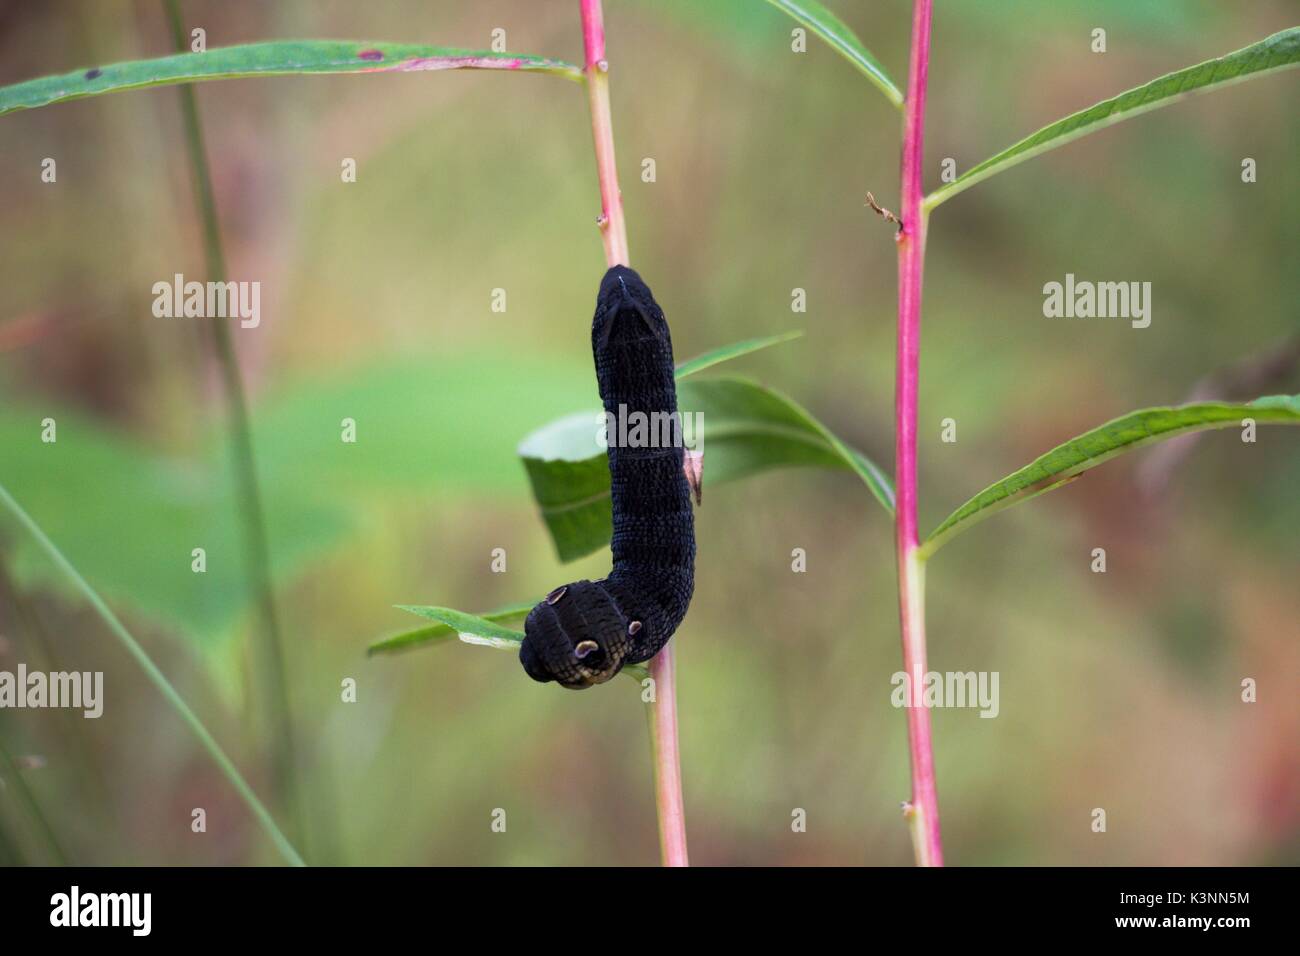 A large caterpillar of black color on a plant stem in a glade in the forest Stock Photo